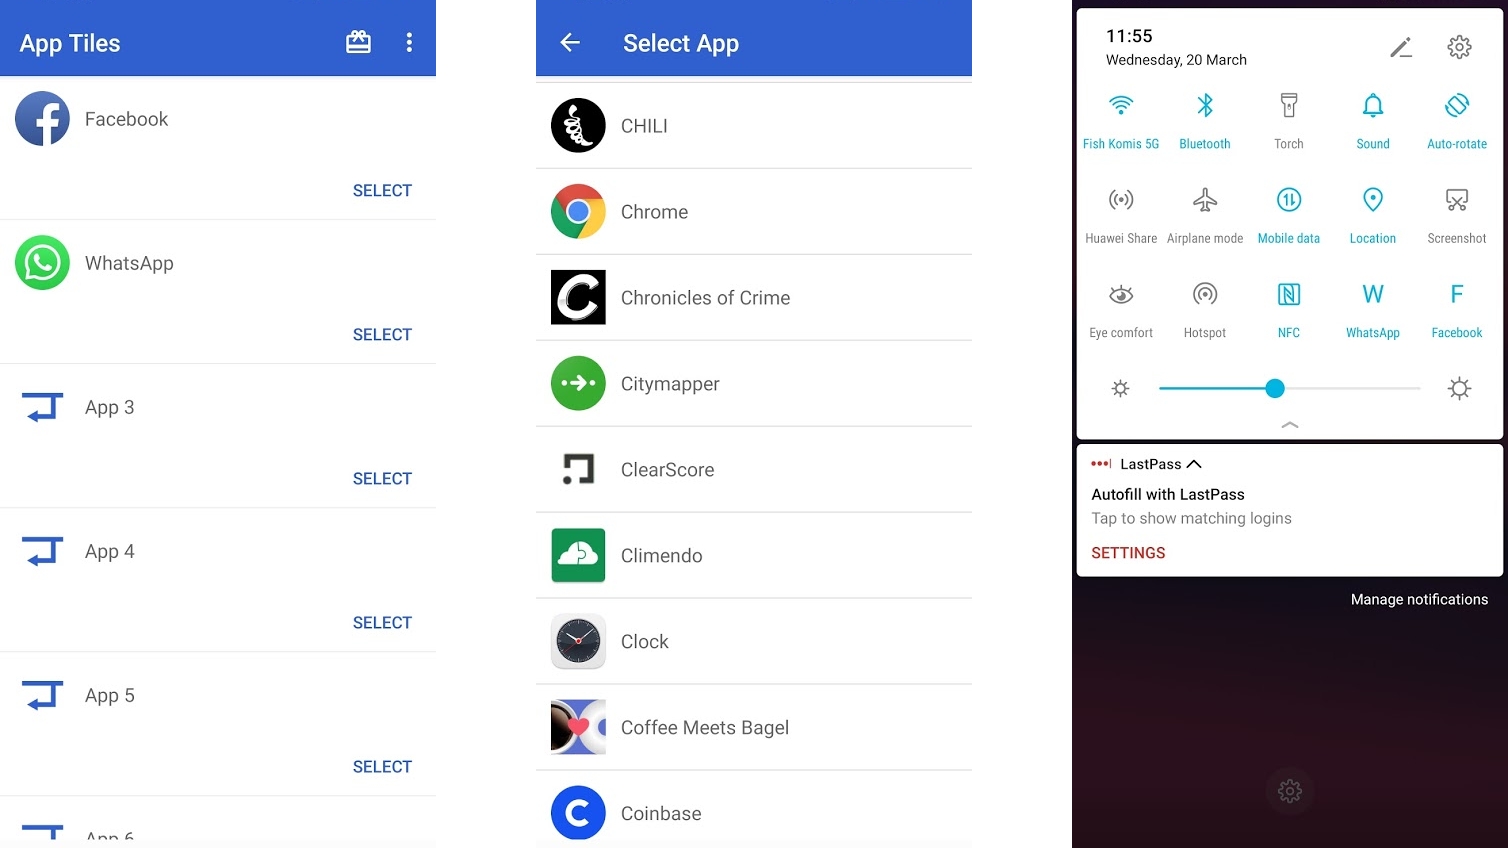 The best Android apps to download in 2019 80